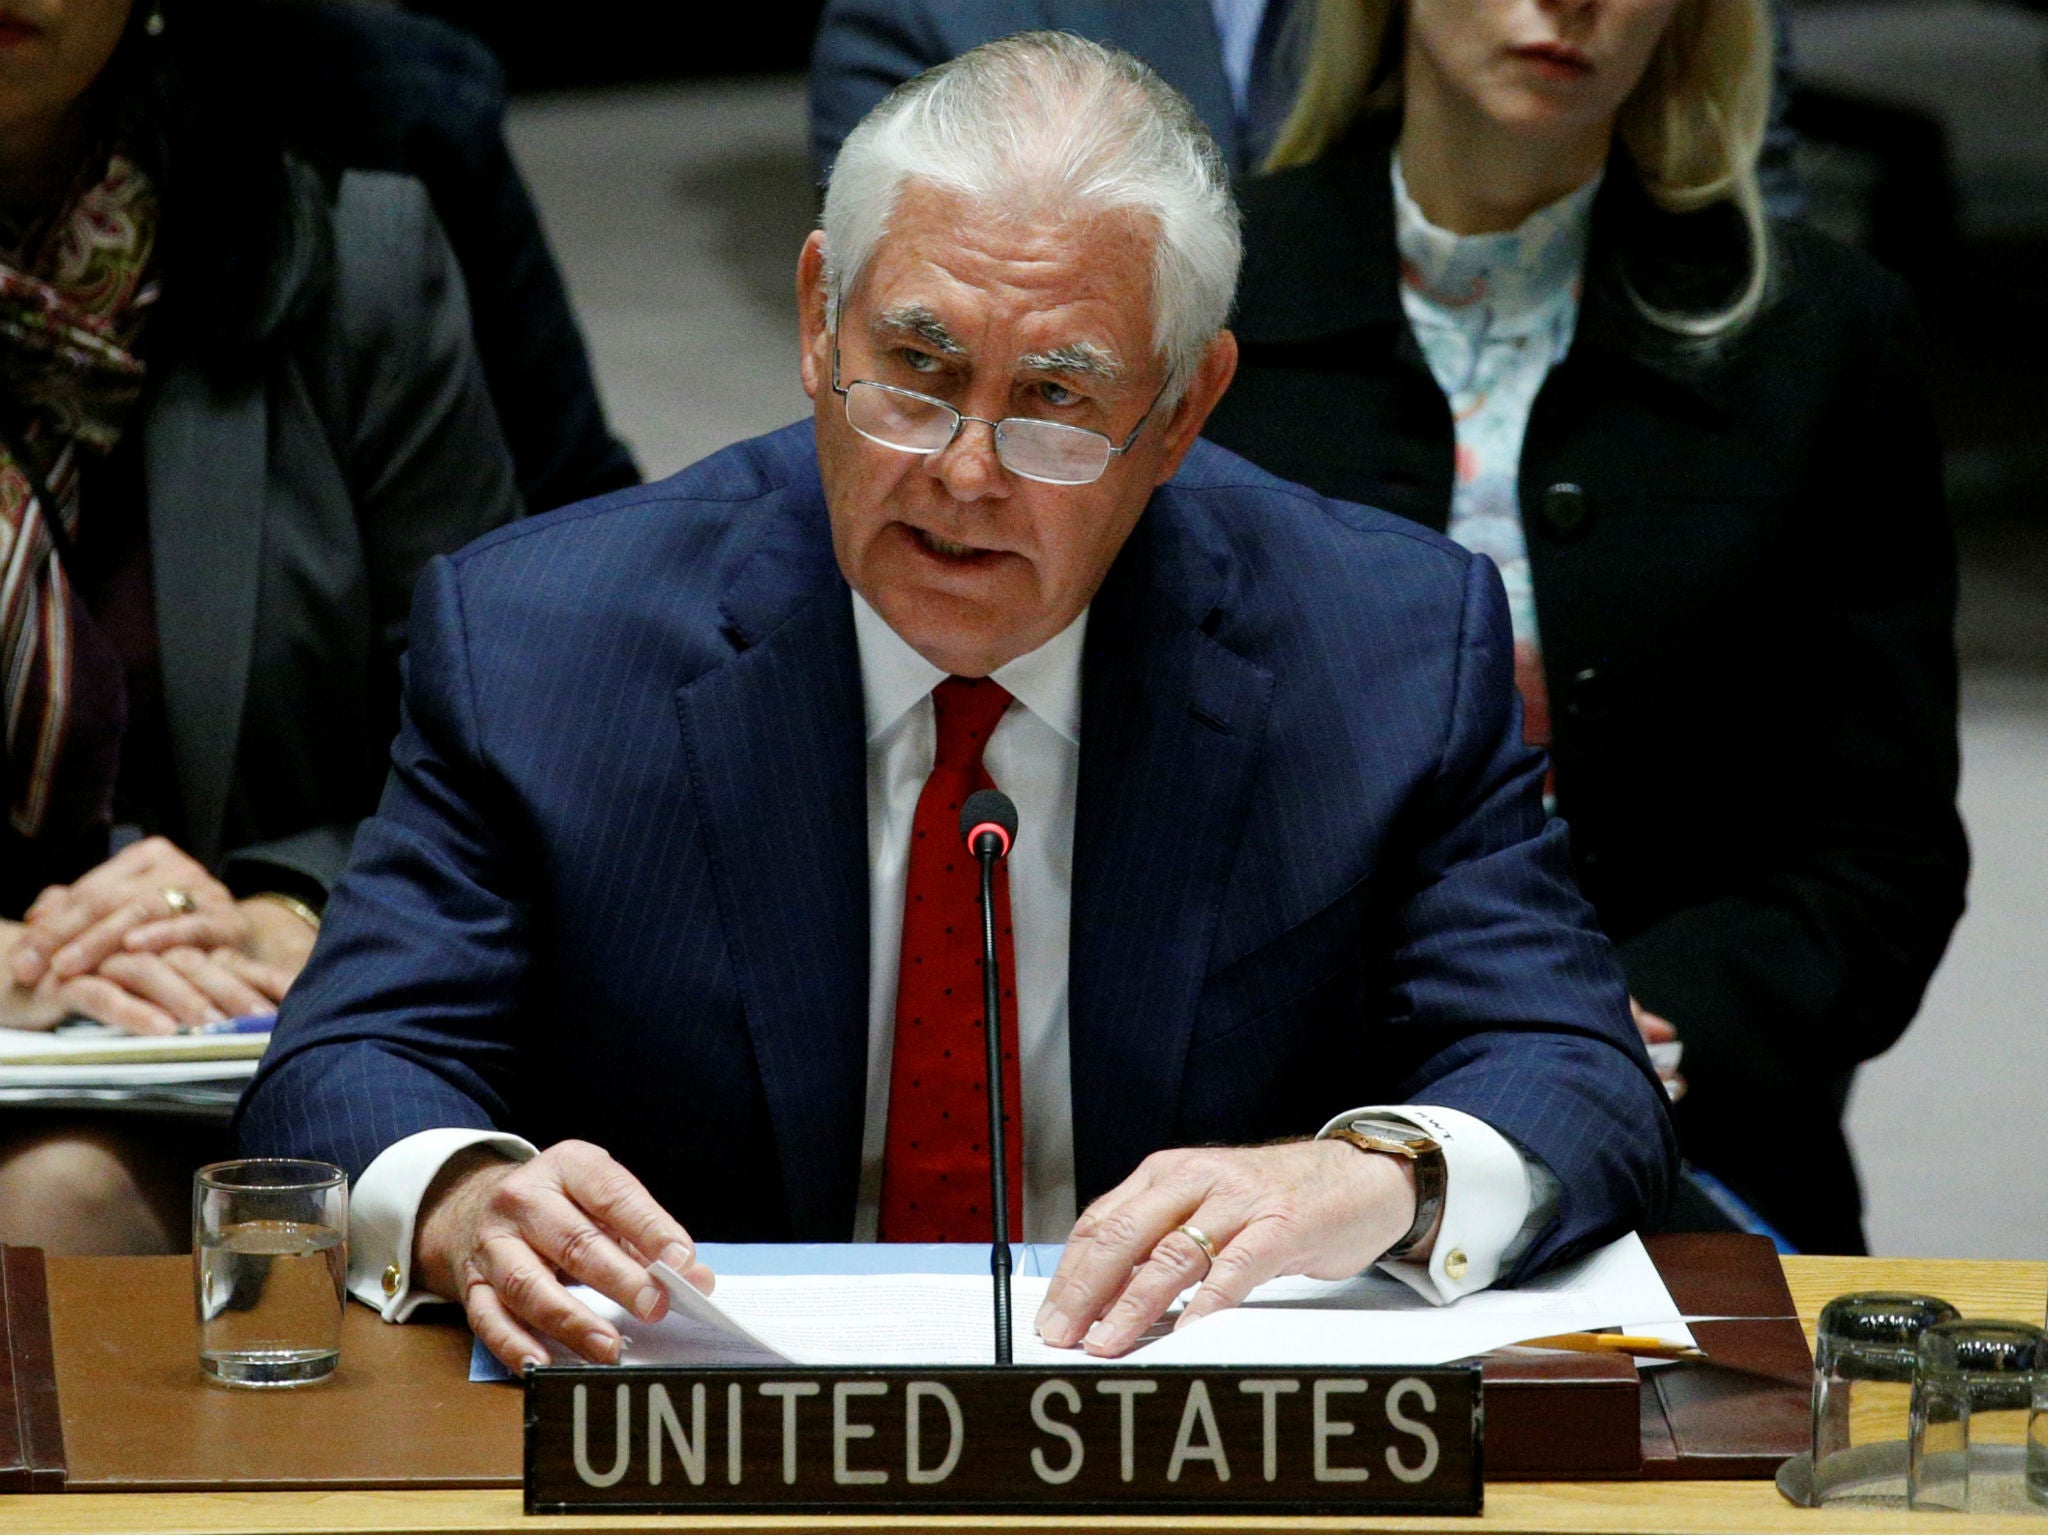 Rex Tillerson speaks during the United Nations Security Council meeting on North Korea's nuclear program at UN headquarters in New York City